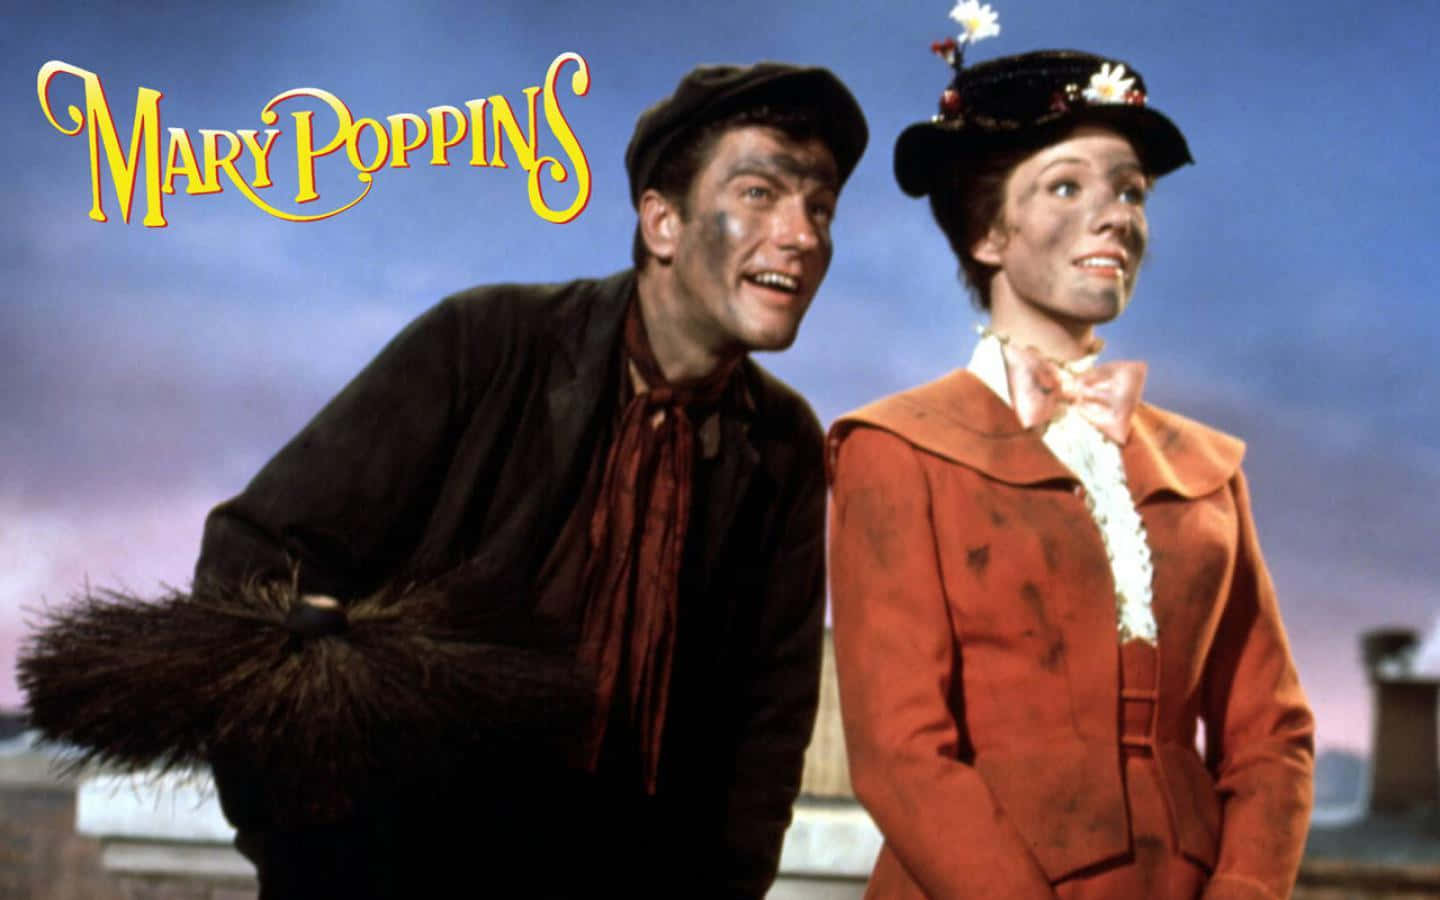 Mary Poppins spreading magic in the sky Wallpaper